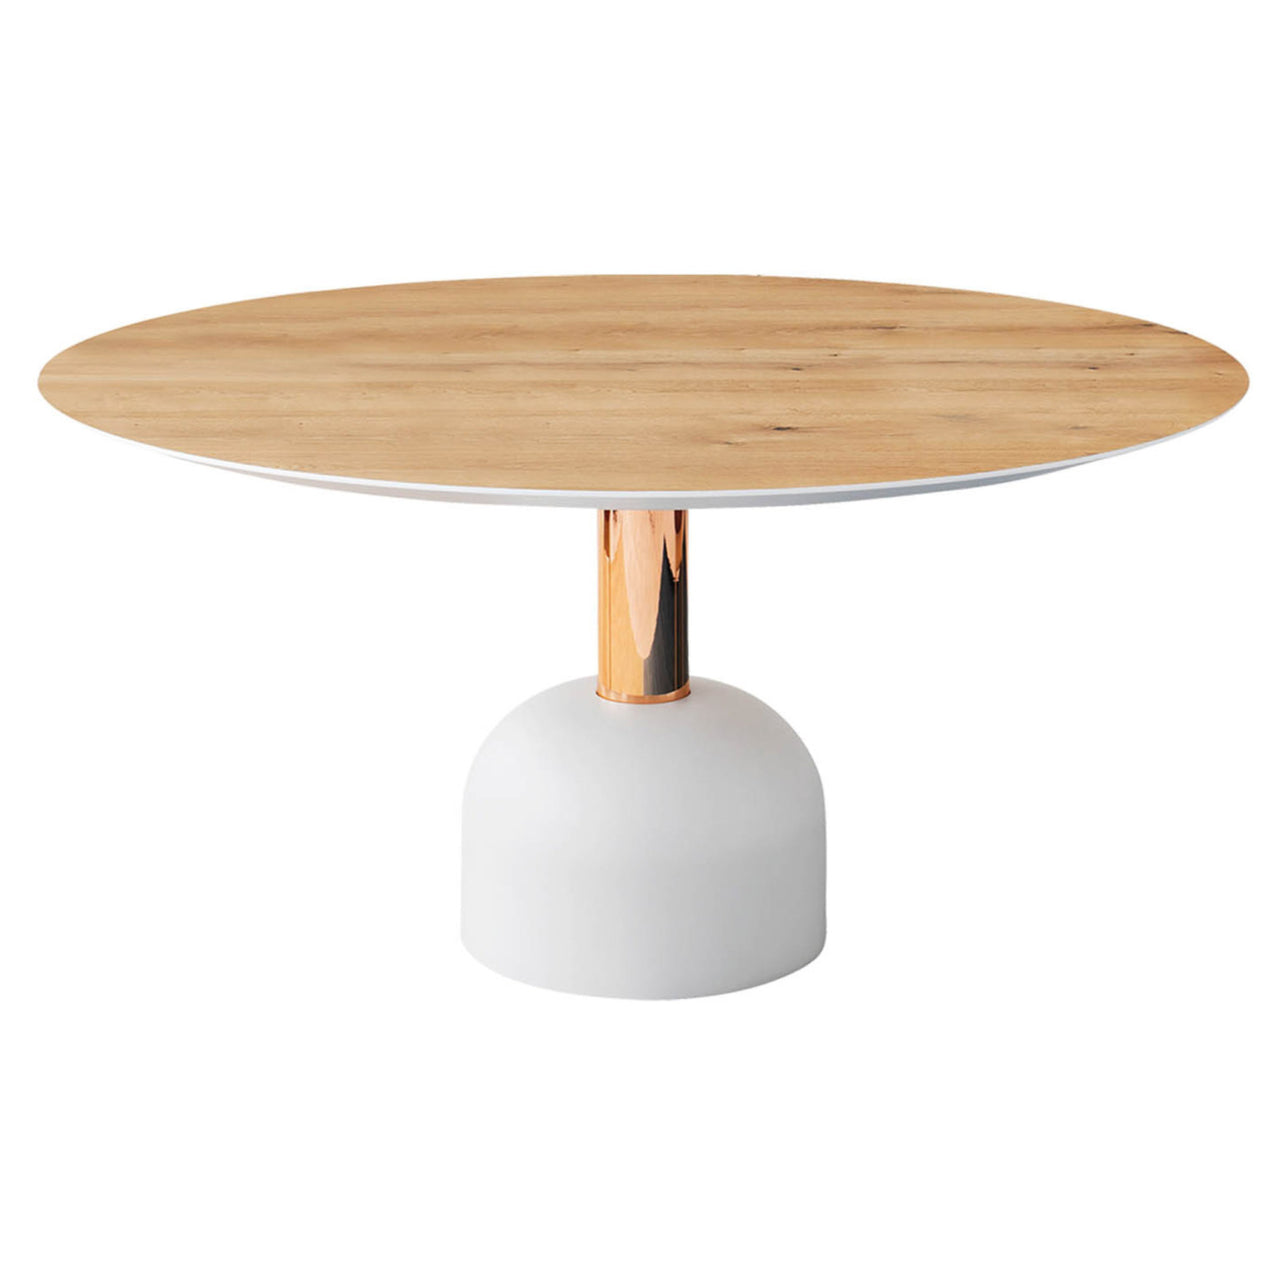 Illo XL Round Dining Table: Vintage Oak + Lacquered White + Copper